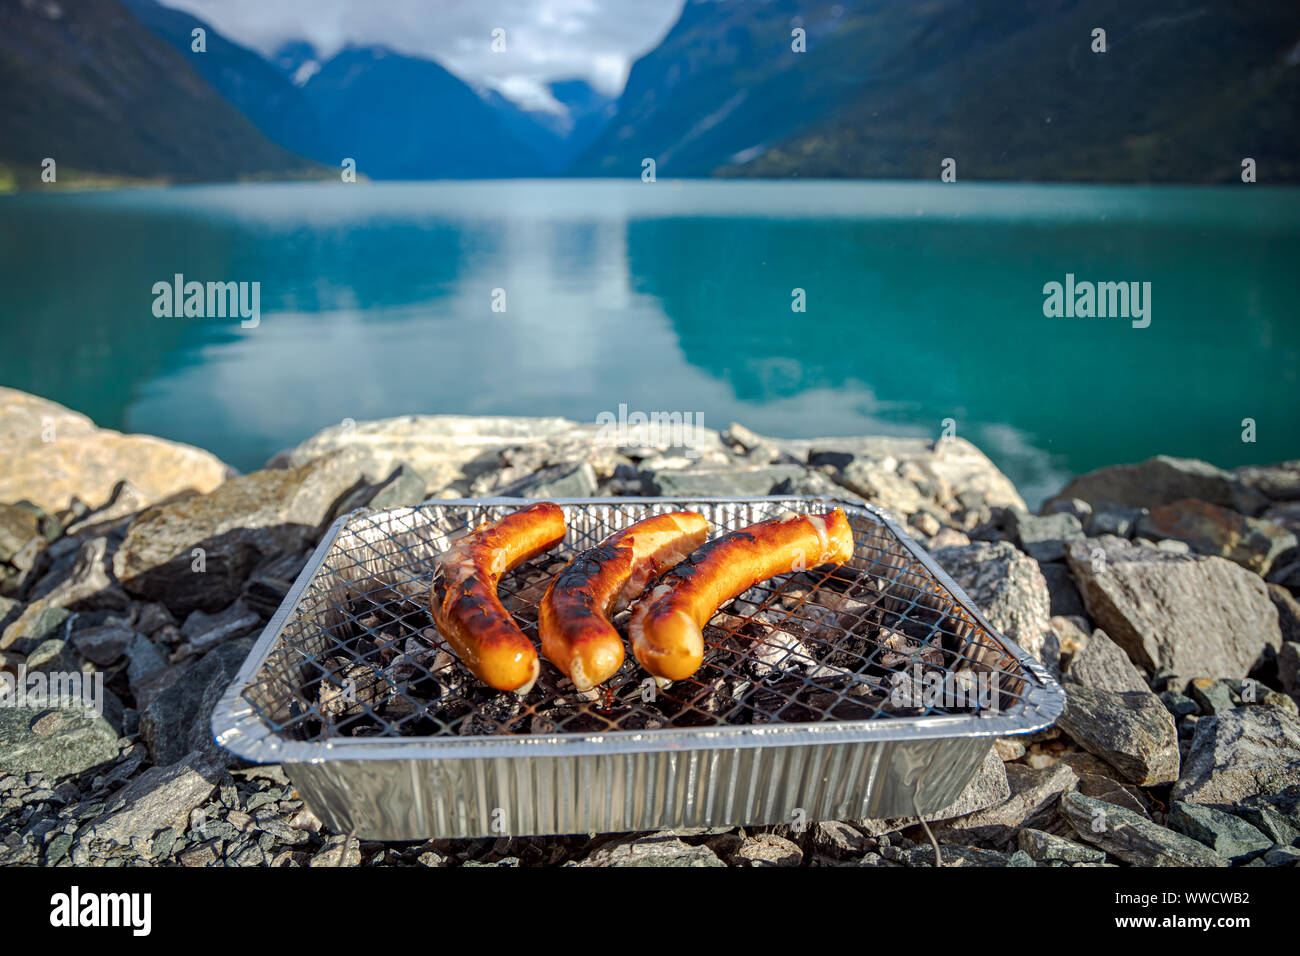 Grilling sausages on disposable barbecue grid. Beautiful Nature Norway natural landscape. Stock Photo